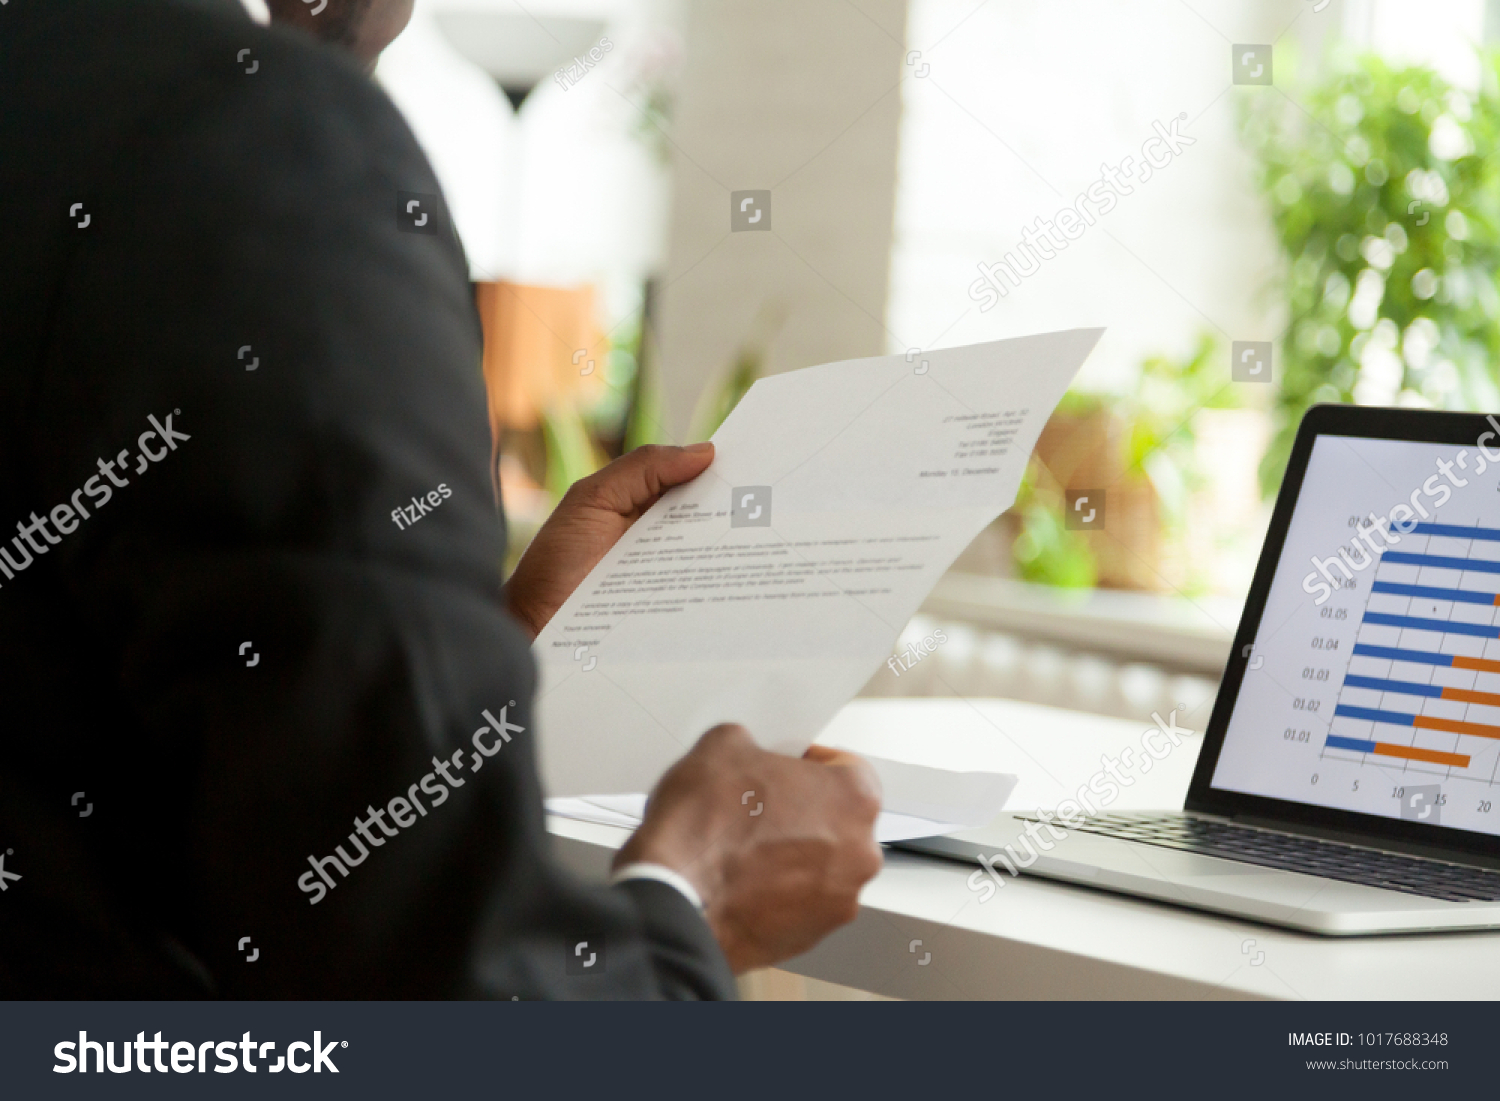 African-american hr manager or employer reading cover letter from job vacancy applicant, black businessman holding business mail checking paper correspondence at workplace, over the shoulder view #1017688348